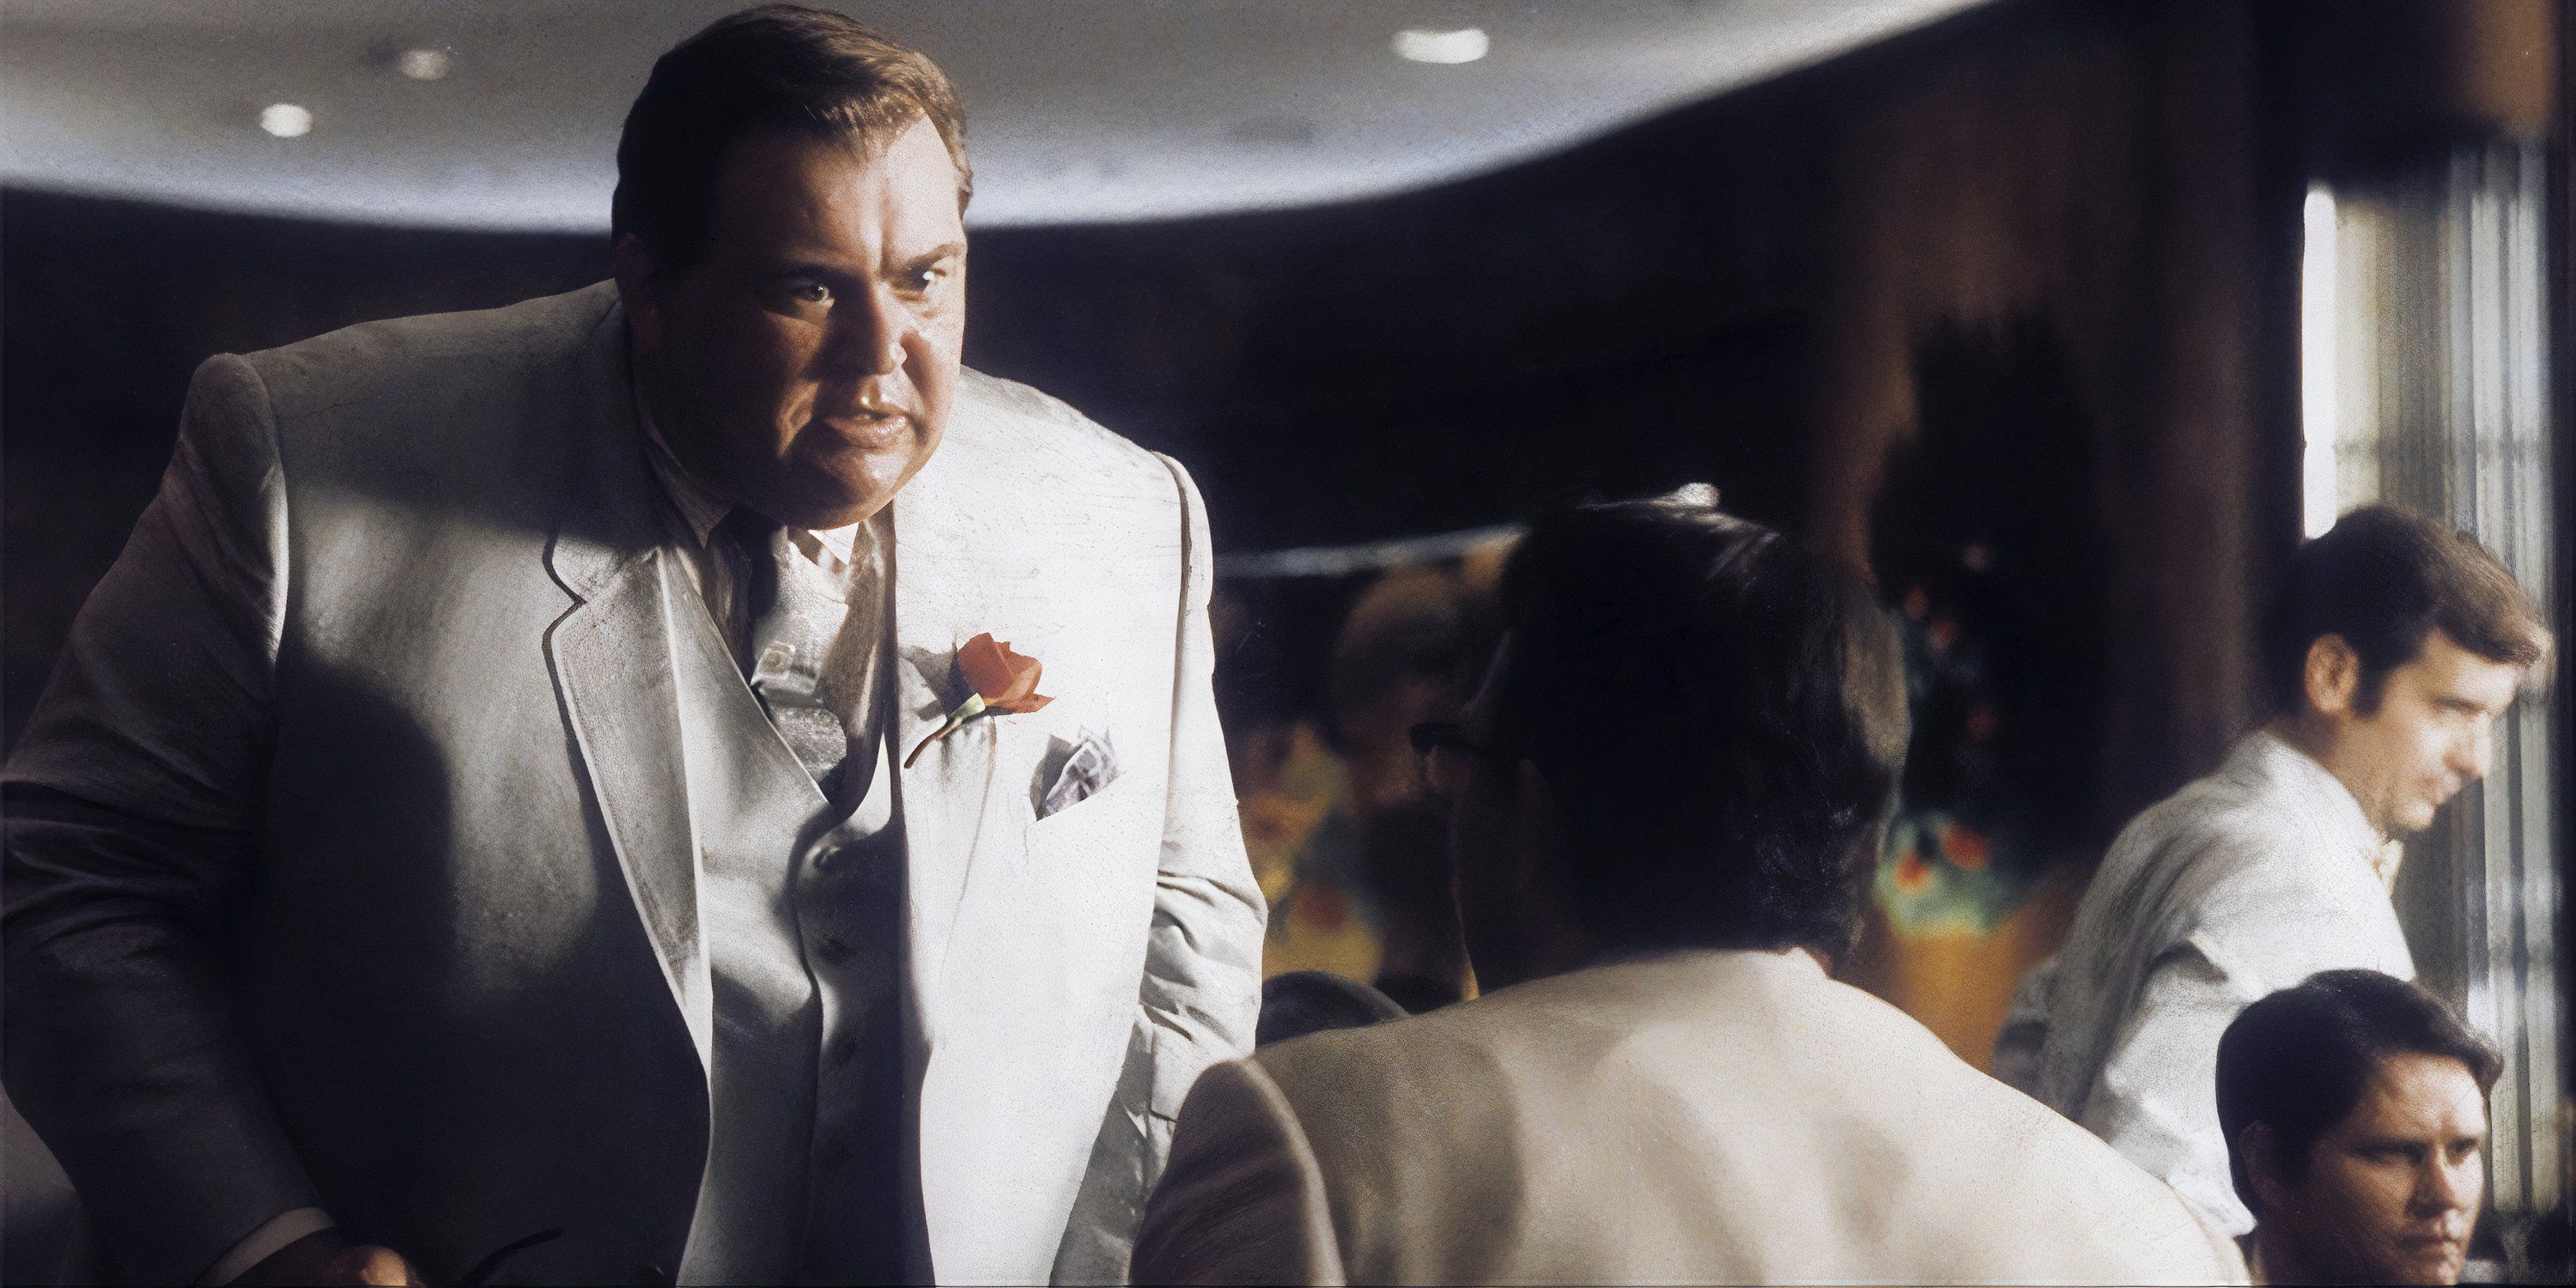 John Candy in a white suit talking to someone in a restaurant in JFK